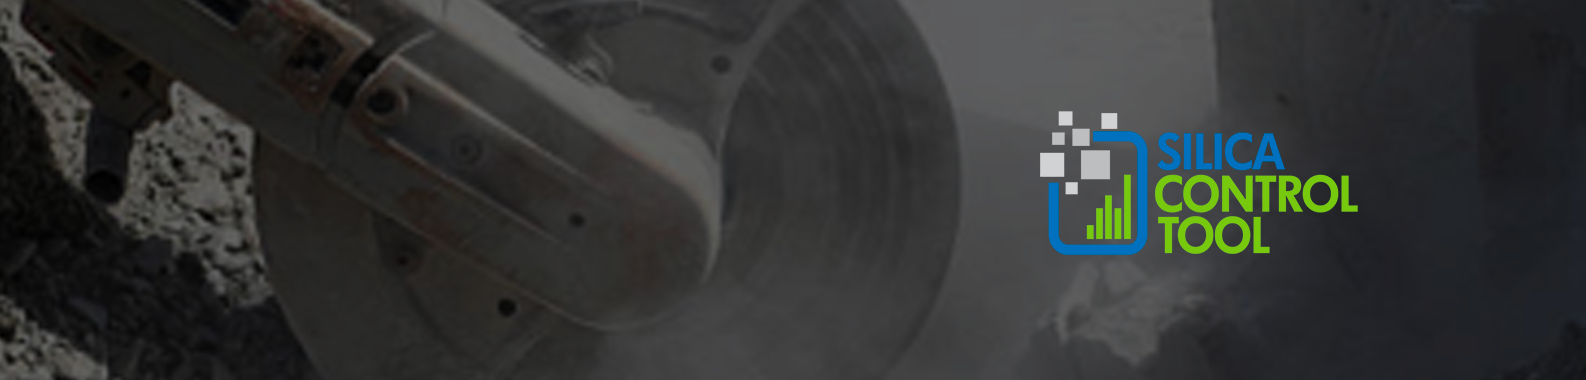 Background image of a saw cutting concrete causing silica dust with logo of Silica Control Tool overplayed